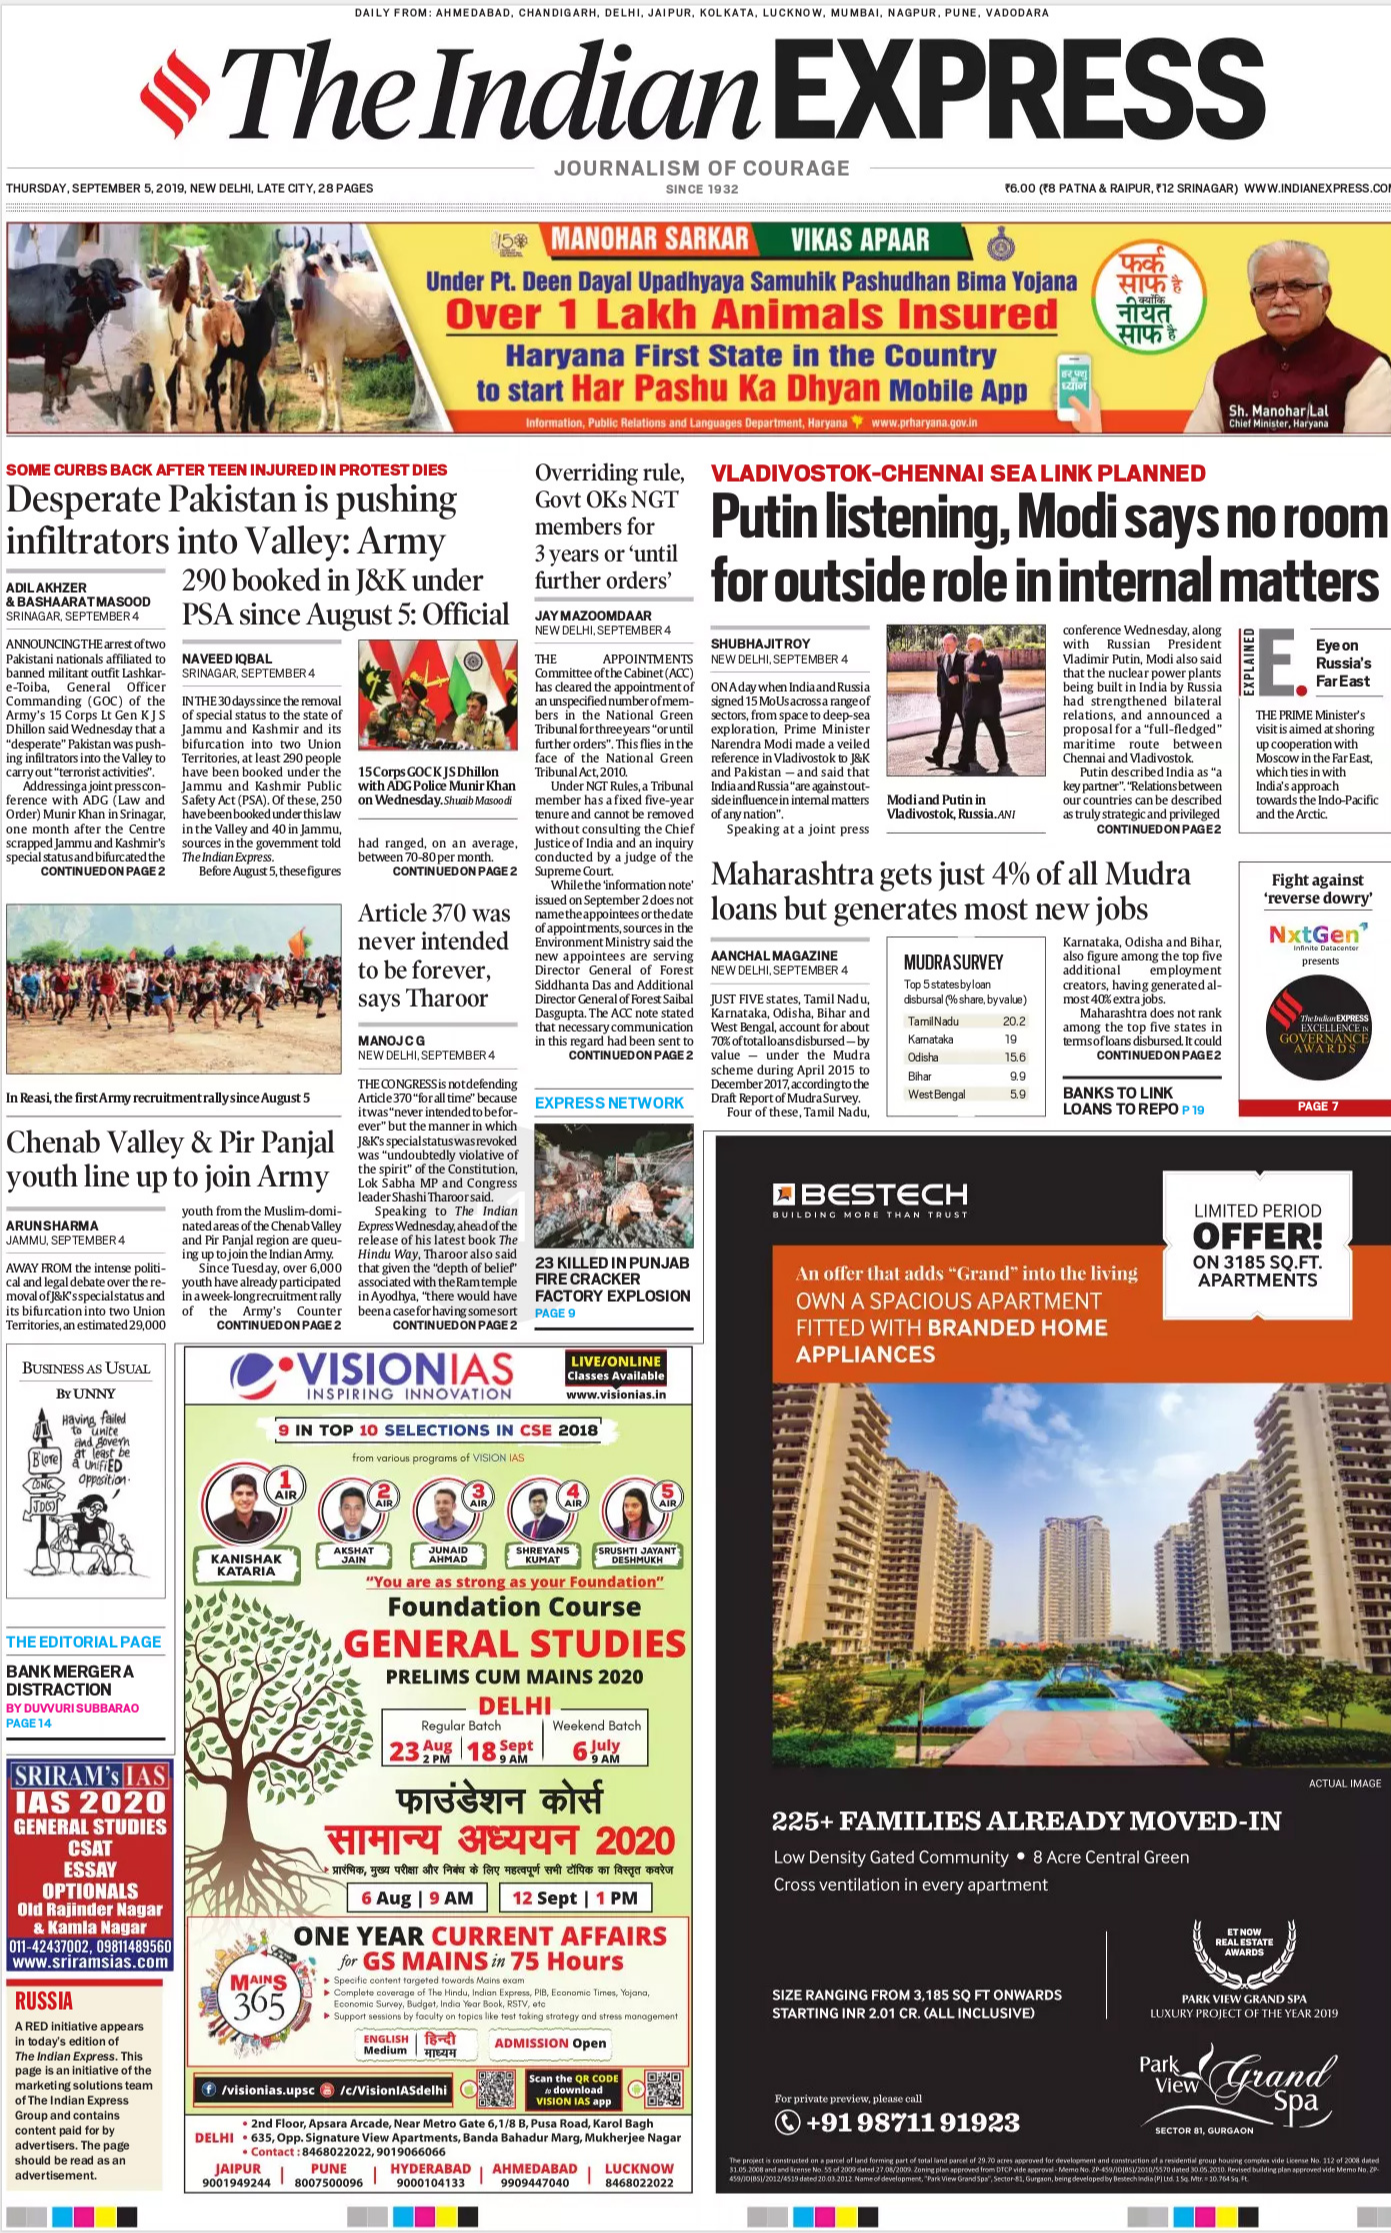 Newspaper Headlines: PM Modi In Russia, Mumbai Rain On Page One Of Newspapers Today